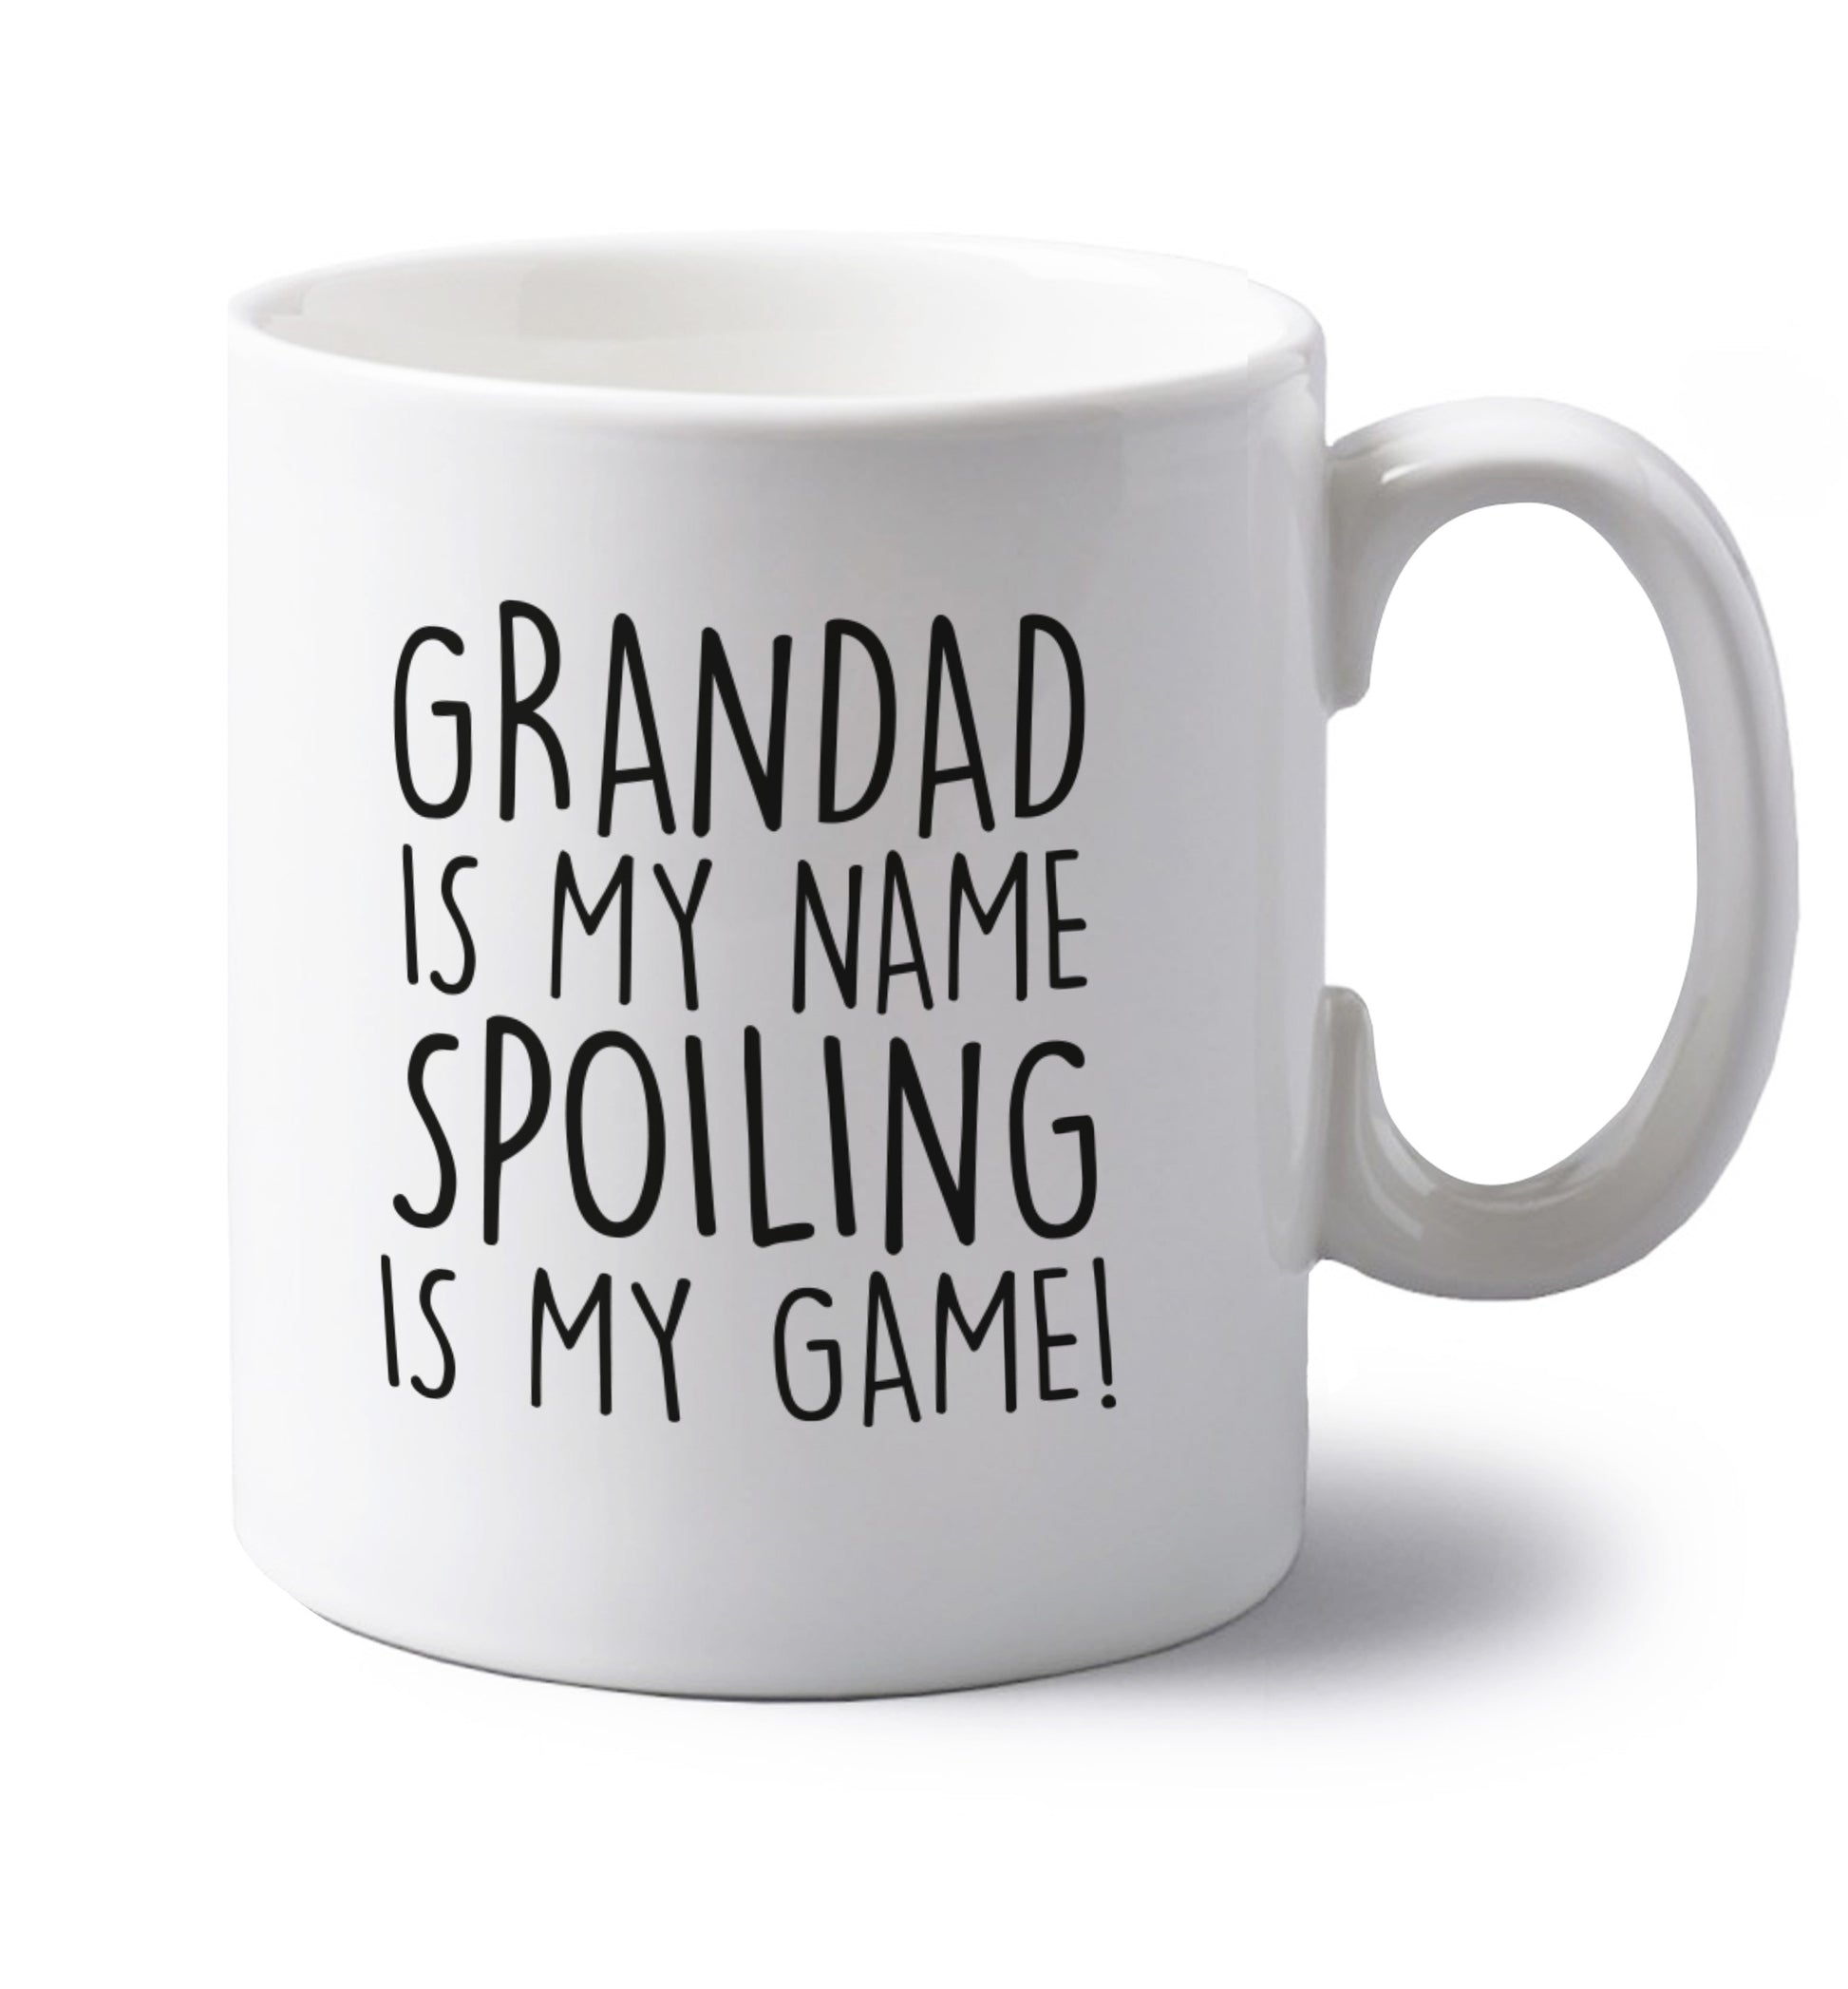 Grandad is my name, spoiling is my game left handed white ceramic mug 